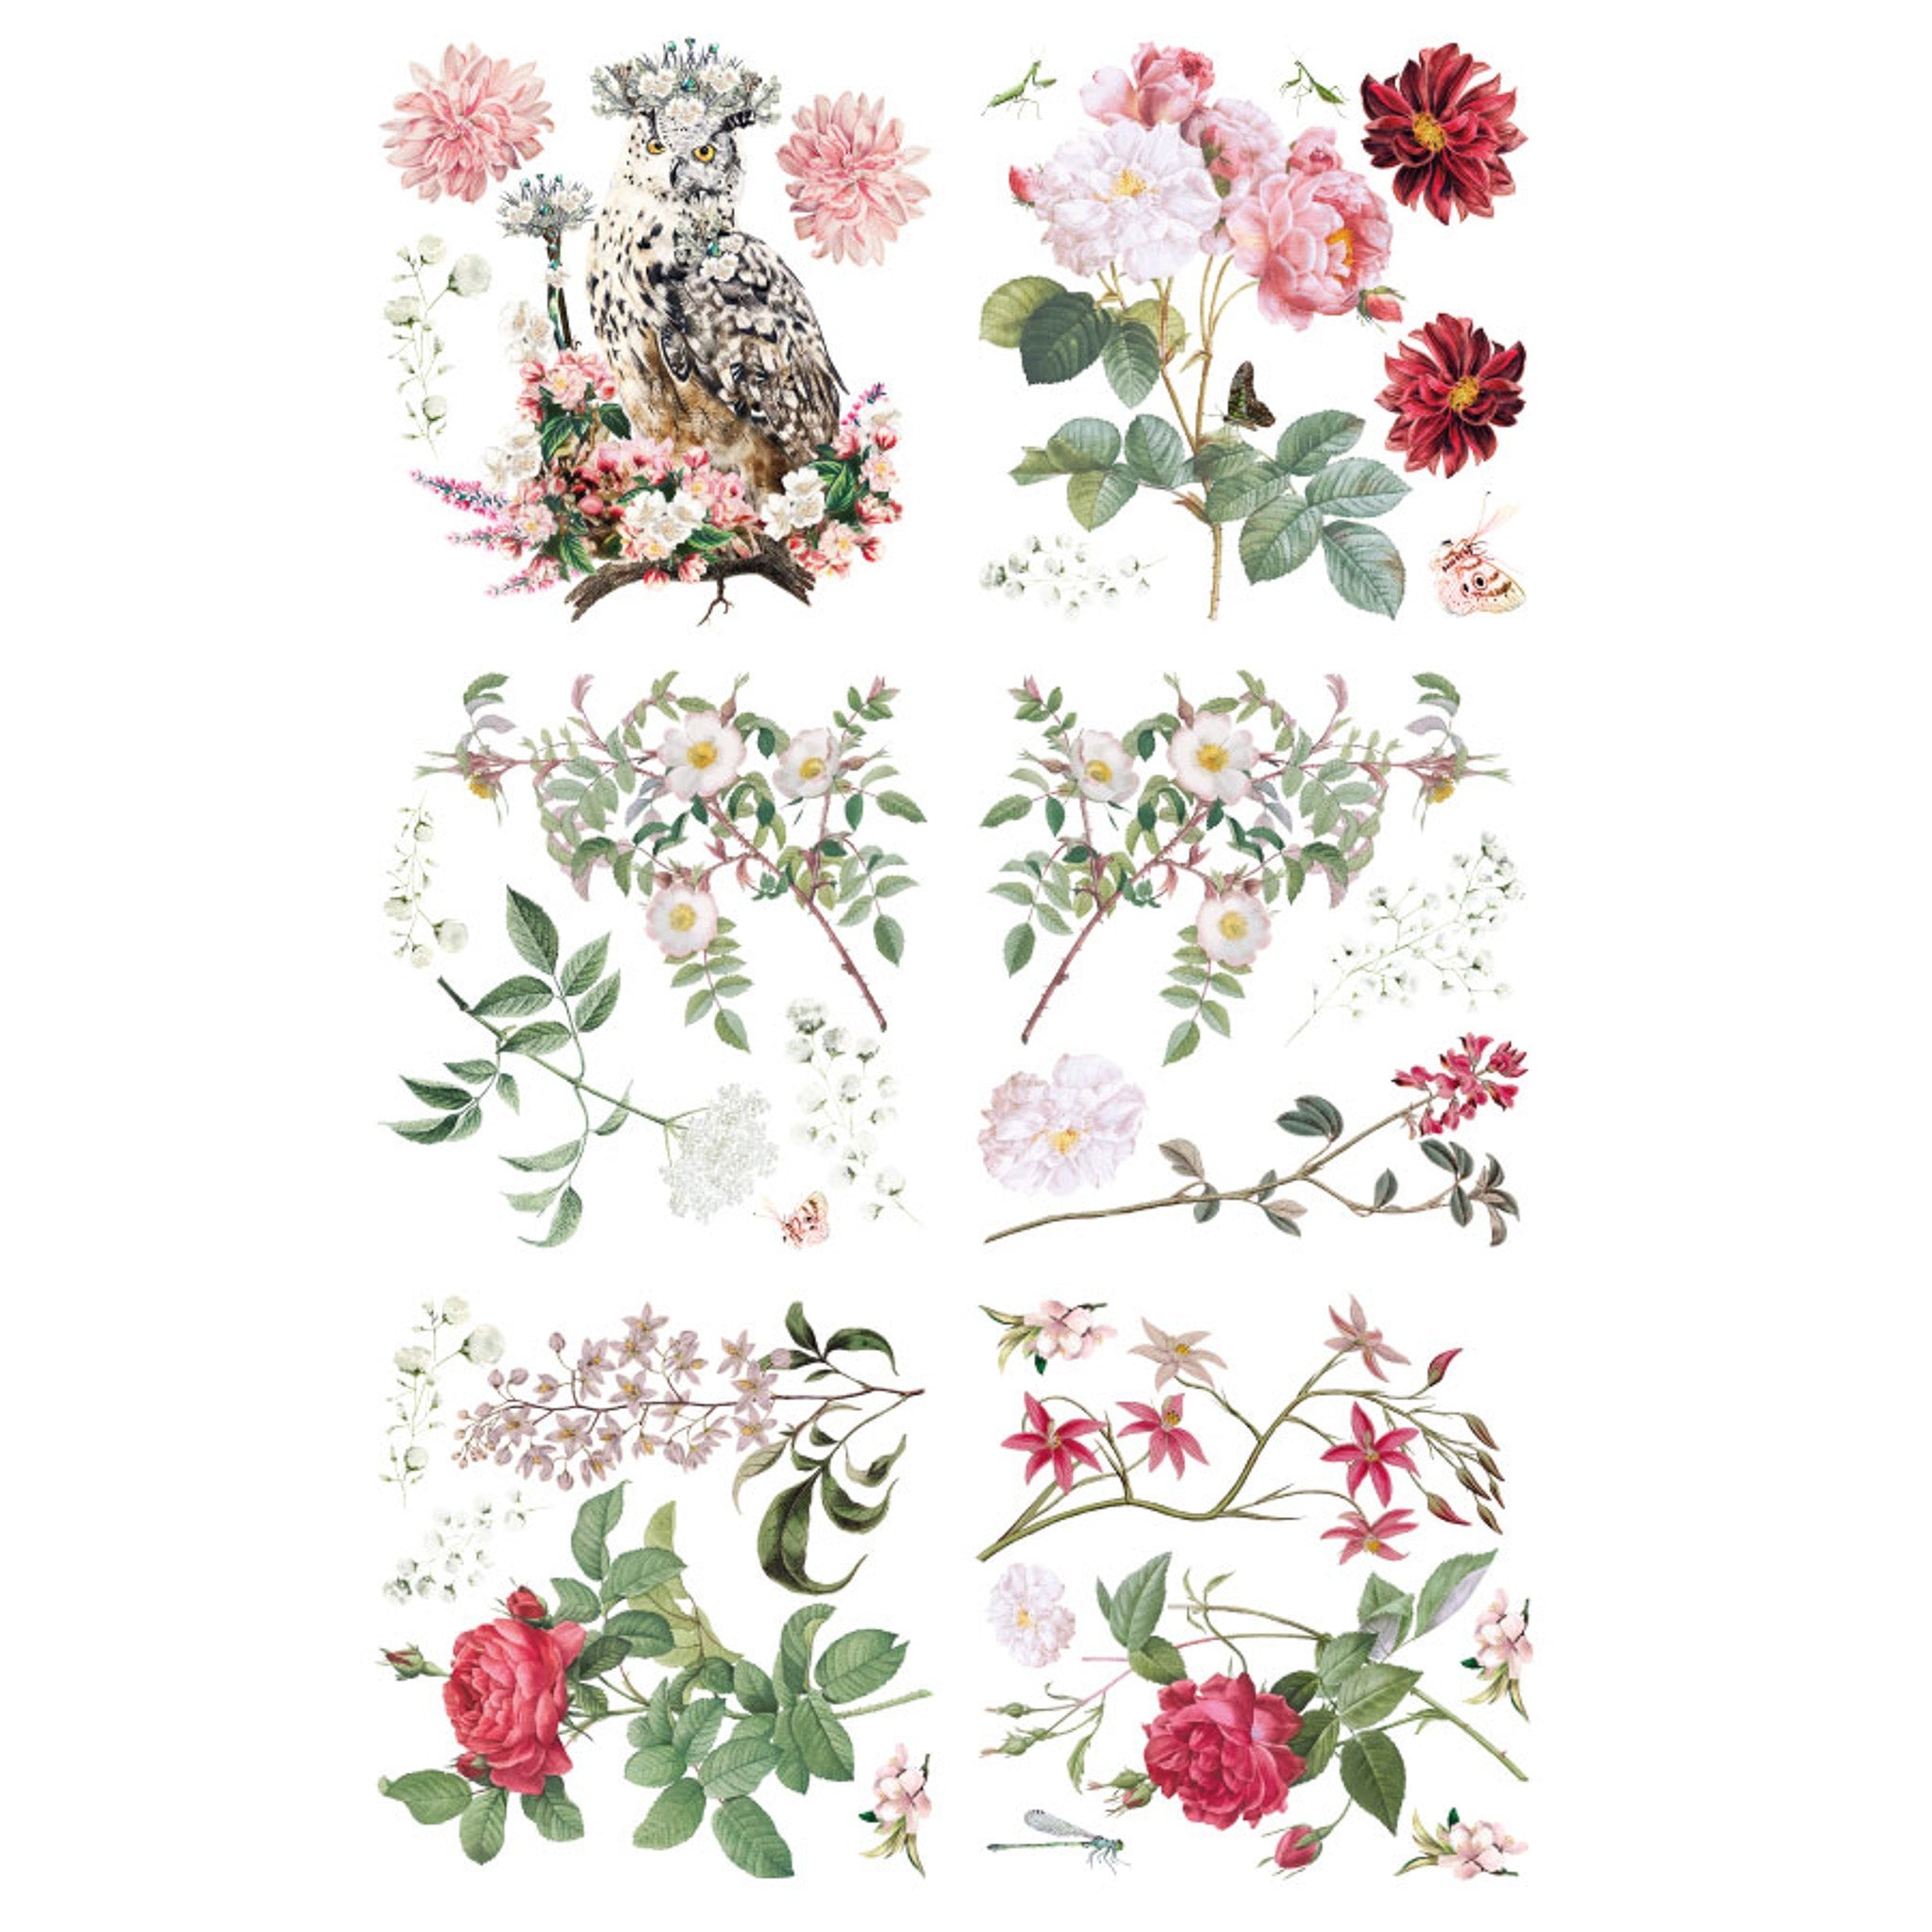 Rub-on transfer design that features 6 sheets of roses, small white flowers, and an owl queen are on a white background.